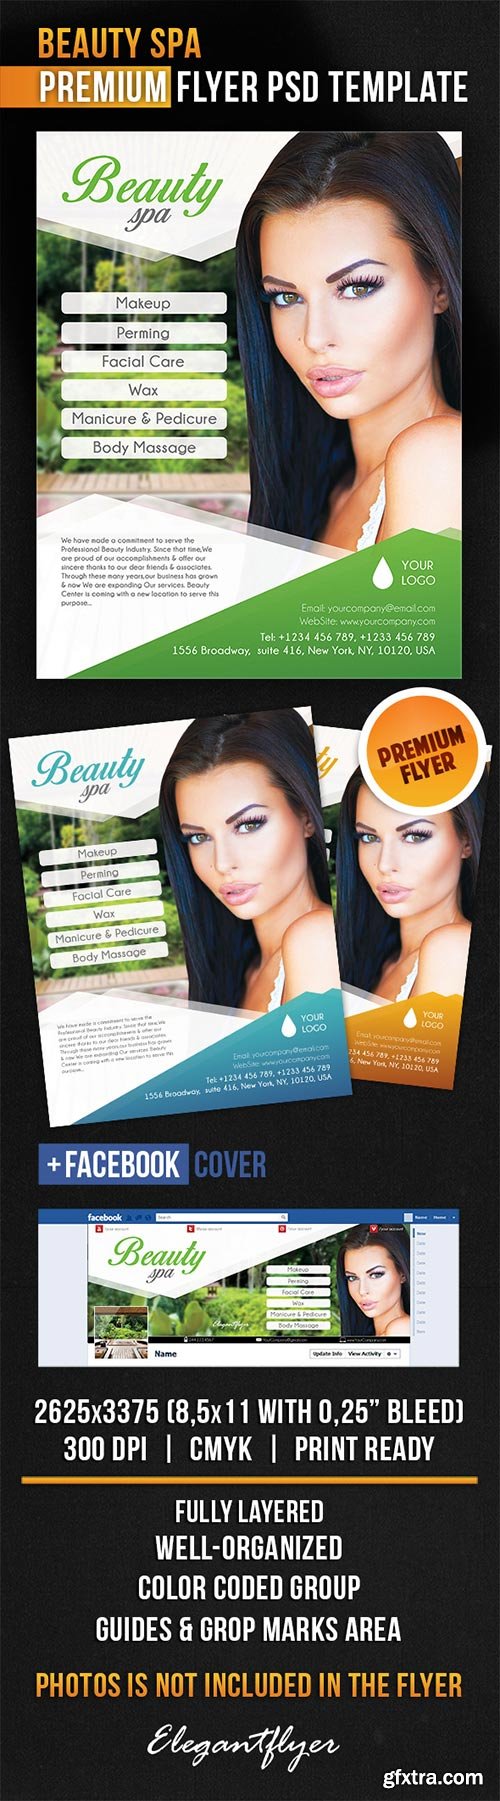 Beauty Spa Flyer PSD Template + Facebook Cover